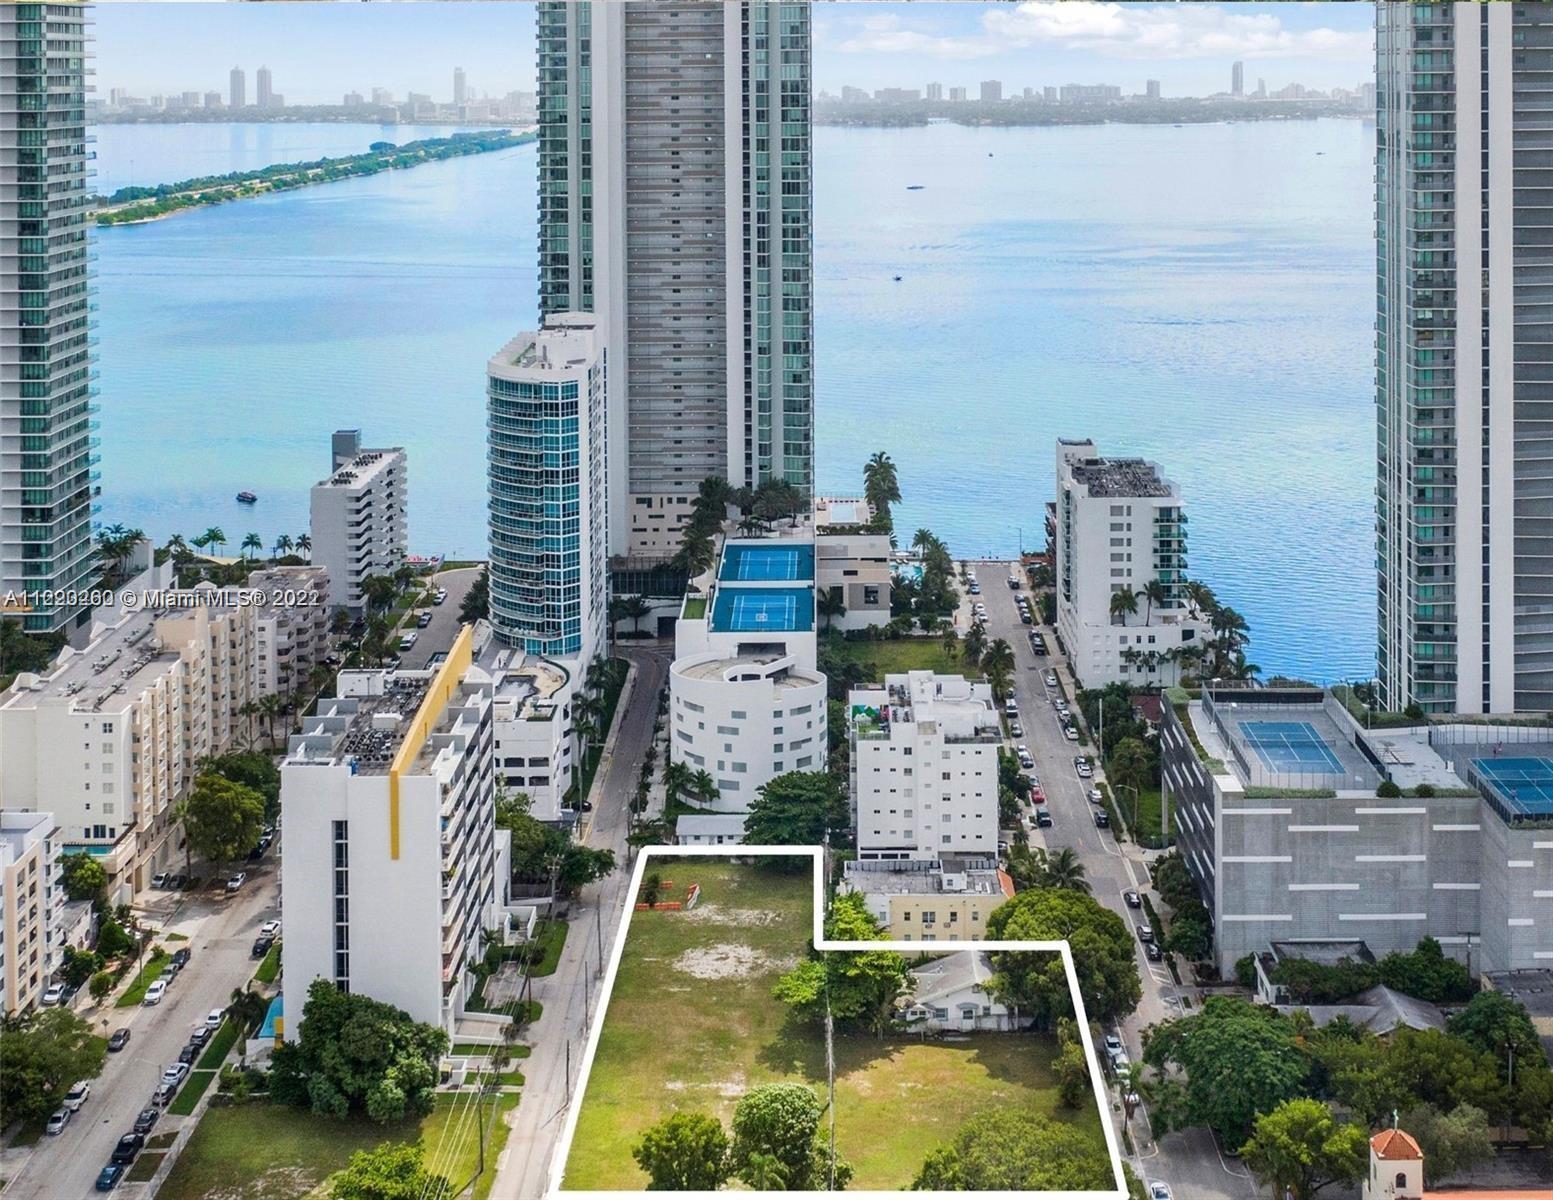 The sky is the limit for innovative development of 29 Edgewater. This listing offers a rare assembla